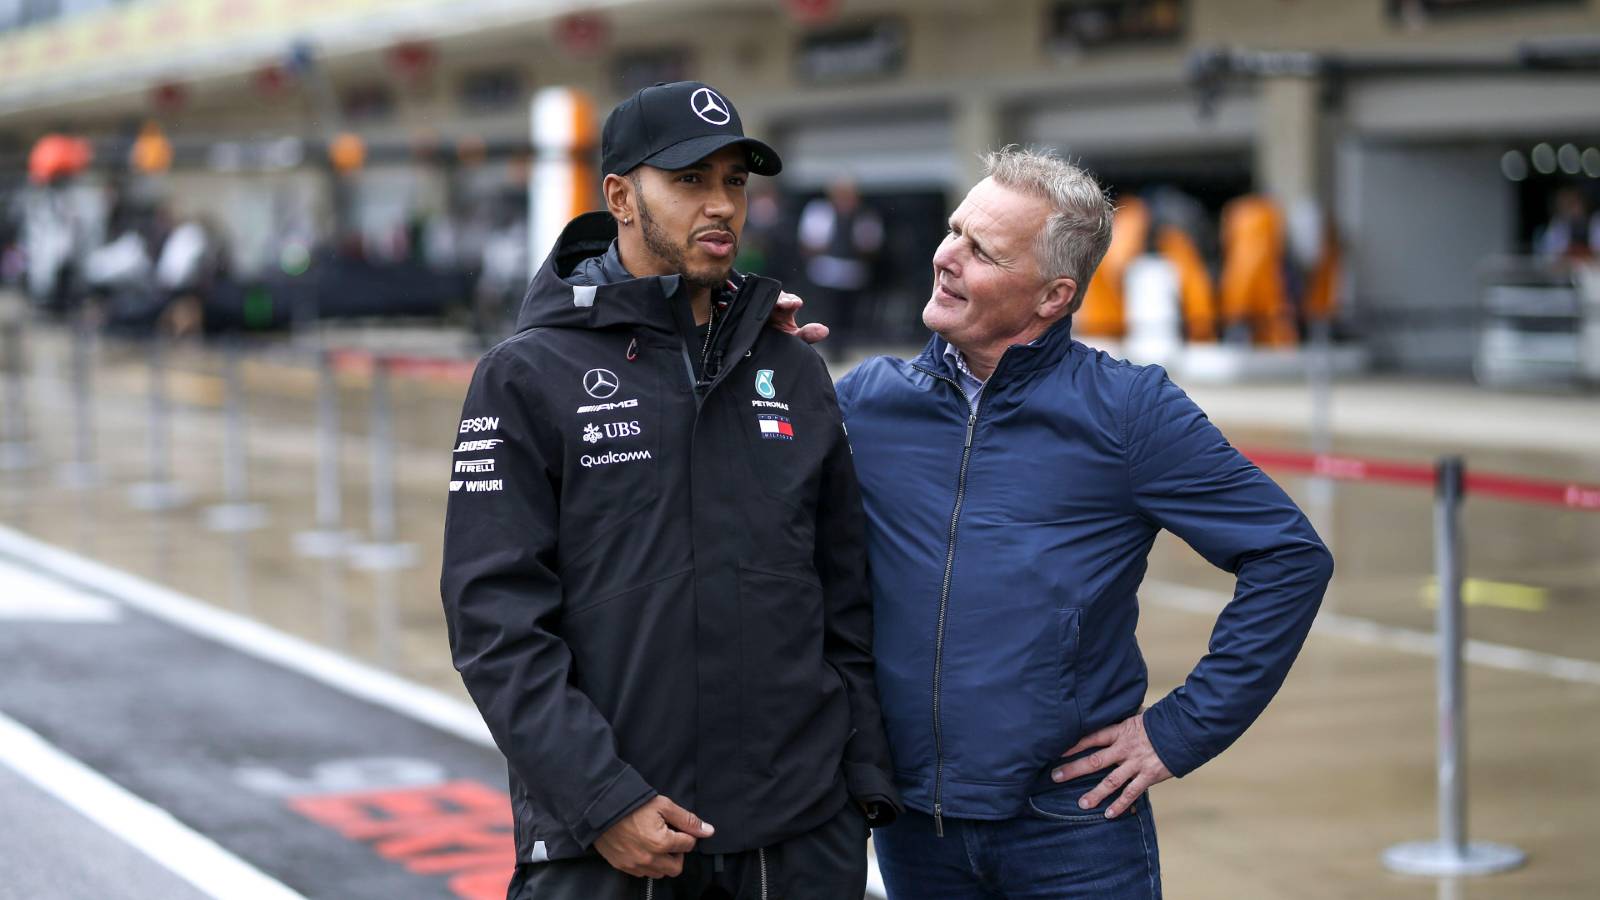 Johnny Herbert with Lewis Hamilton in the pit lane. Austin October 2018.